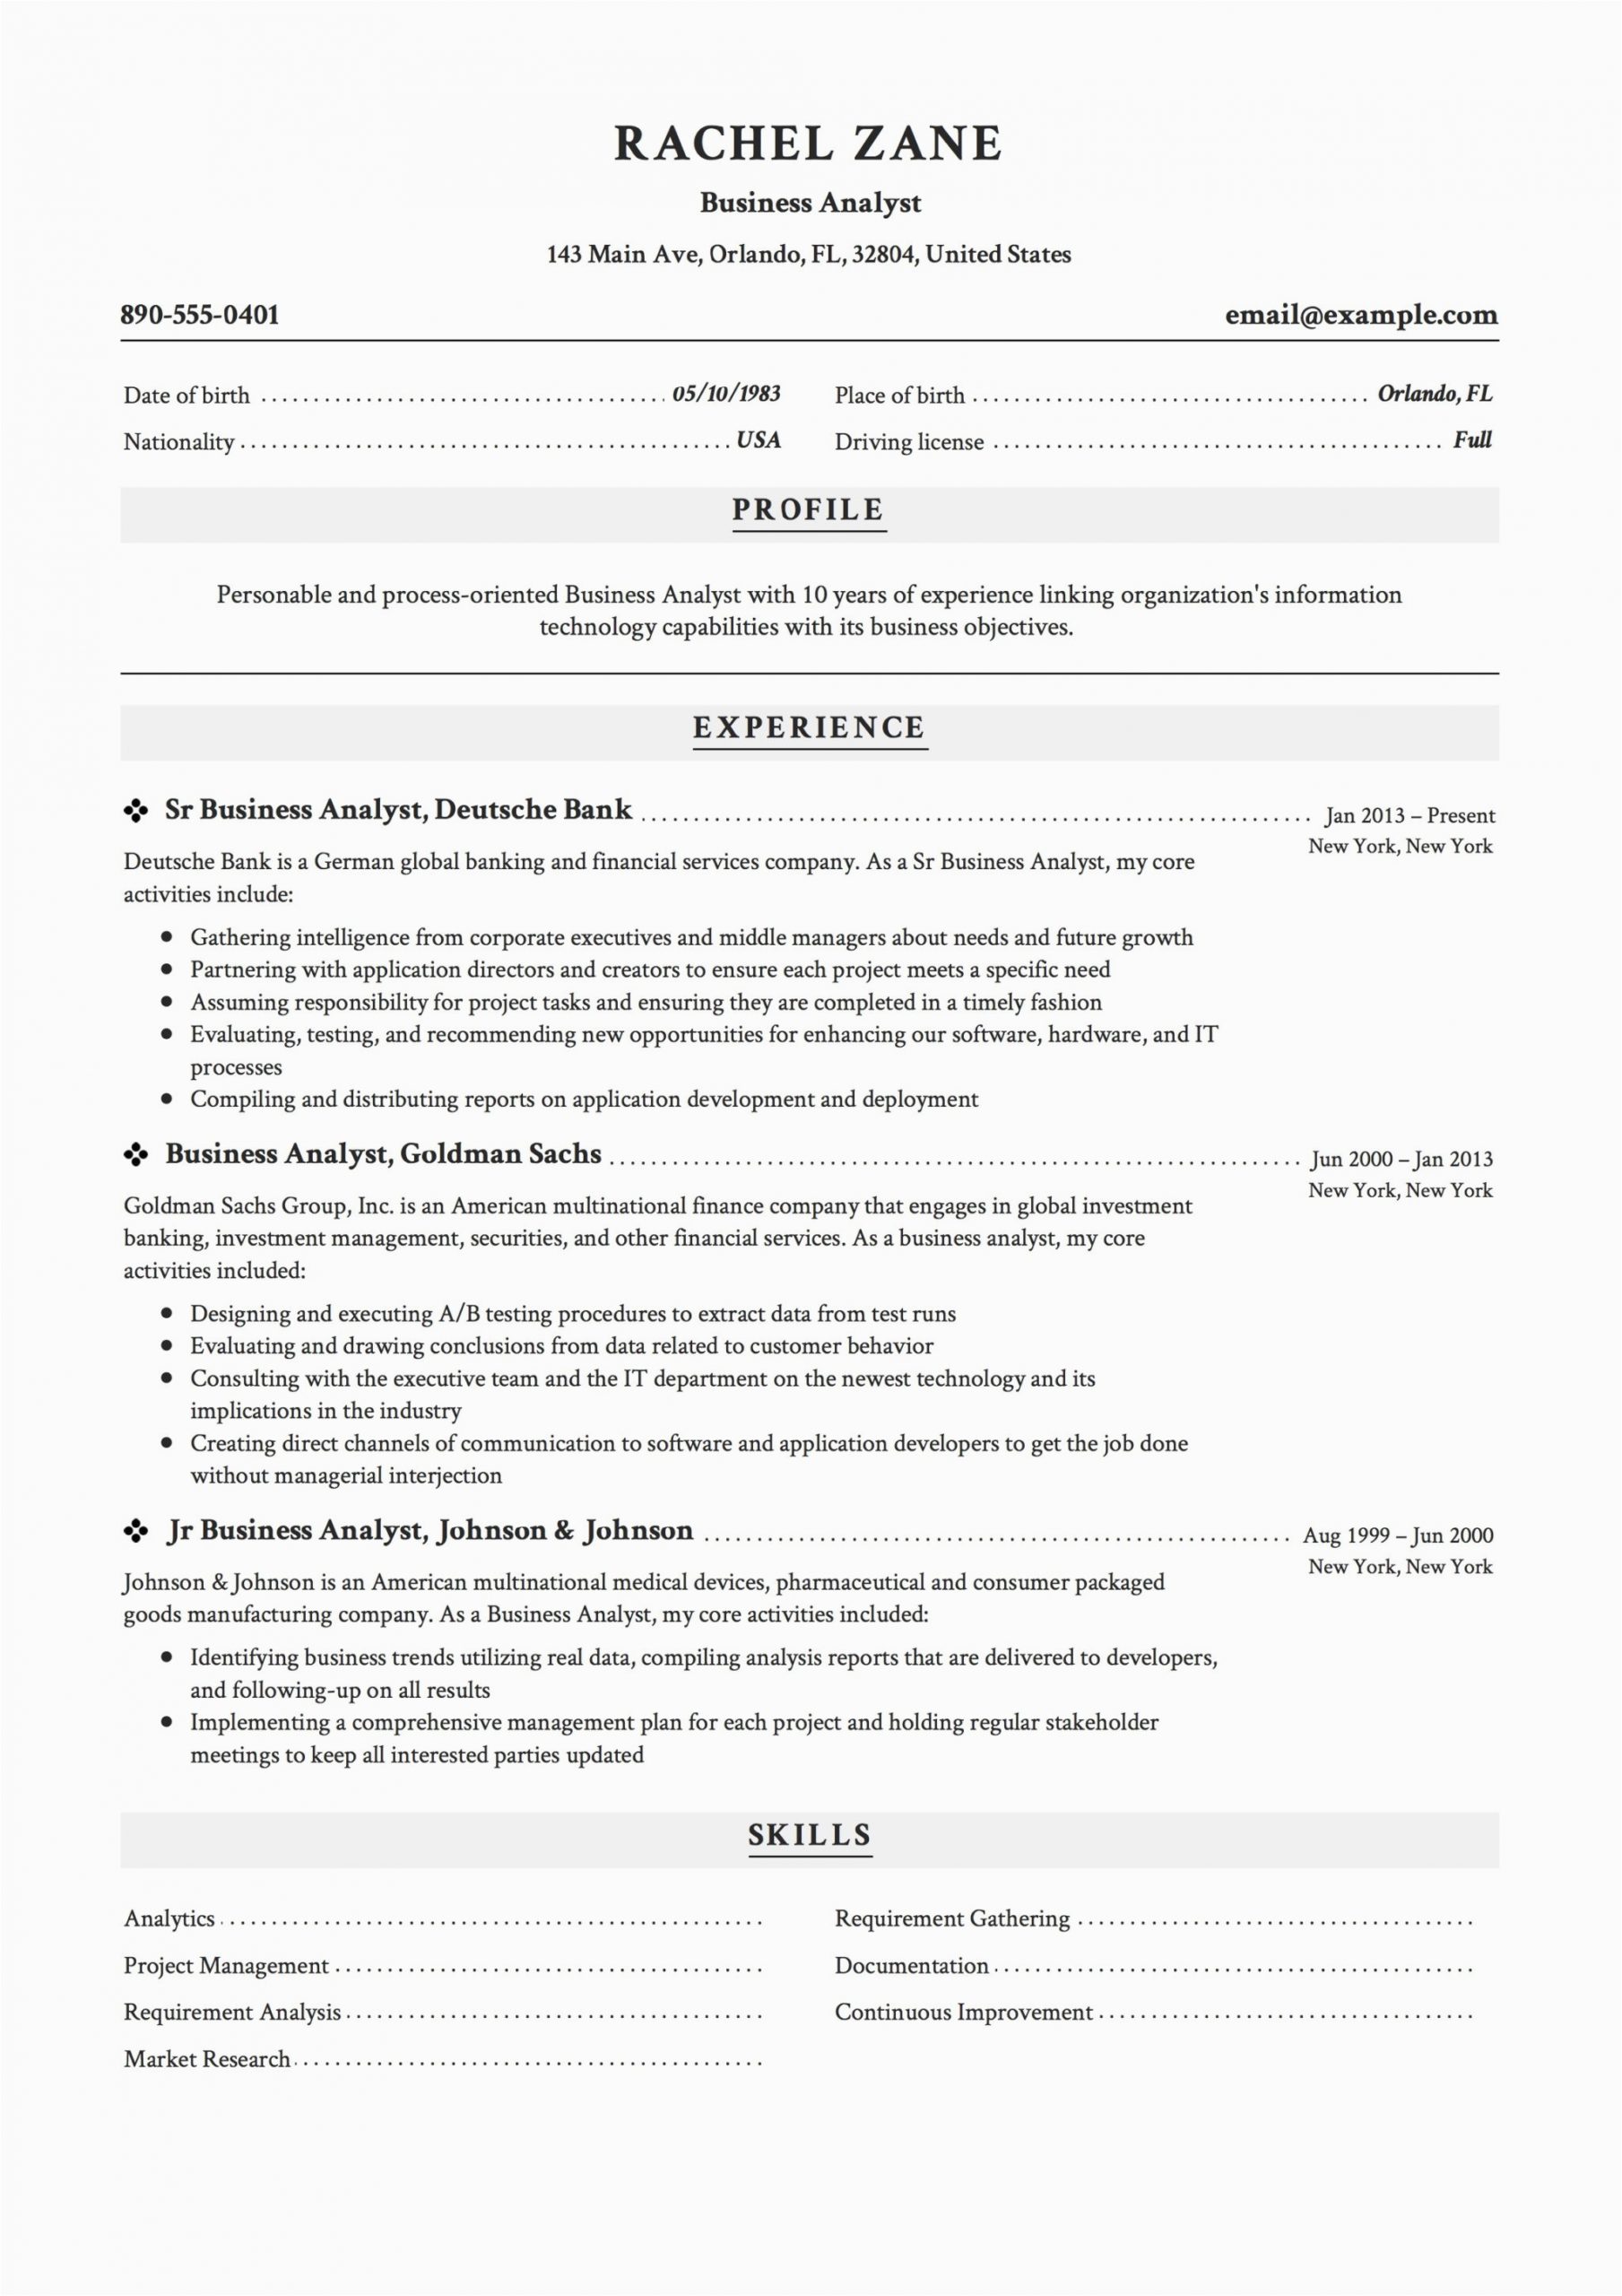 Business Analyst Resume Templates Free Download Business Analyst Resume & Guide 12 Templates